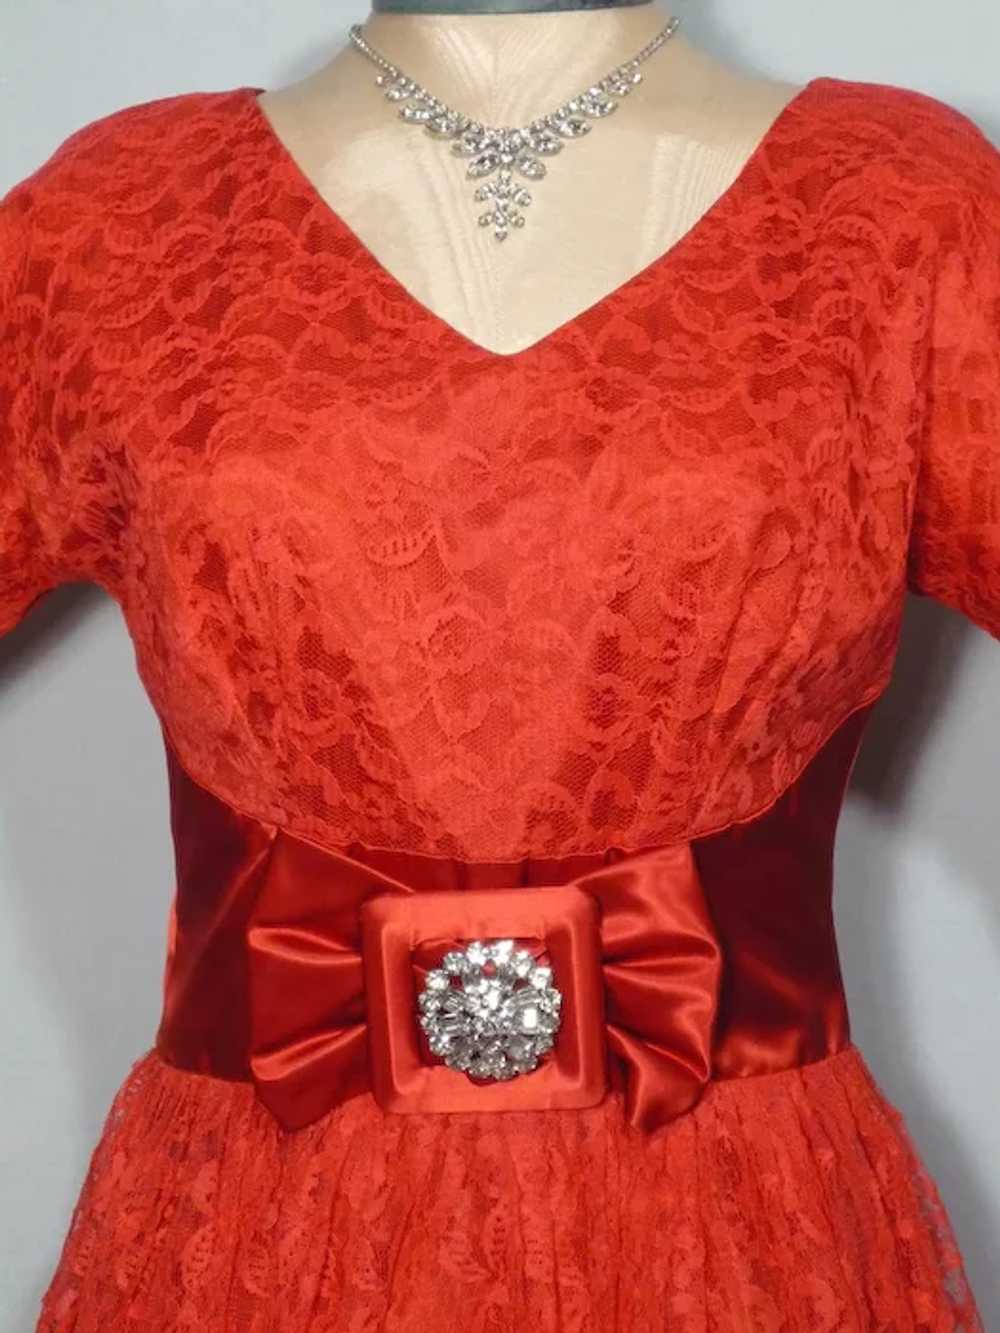 Vintage 1950s Red Chantilly Lace Party Dress - image 5